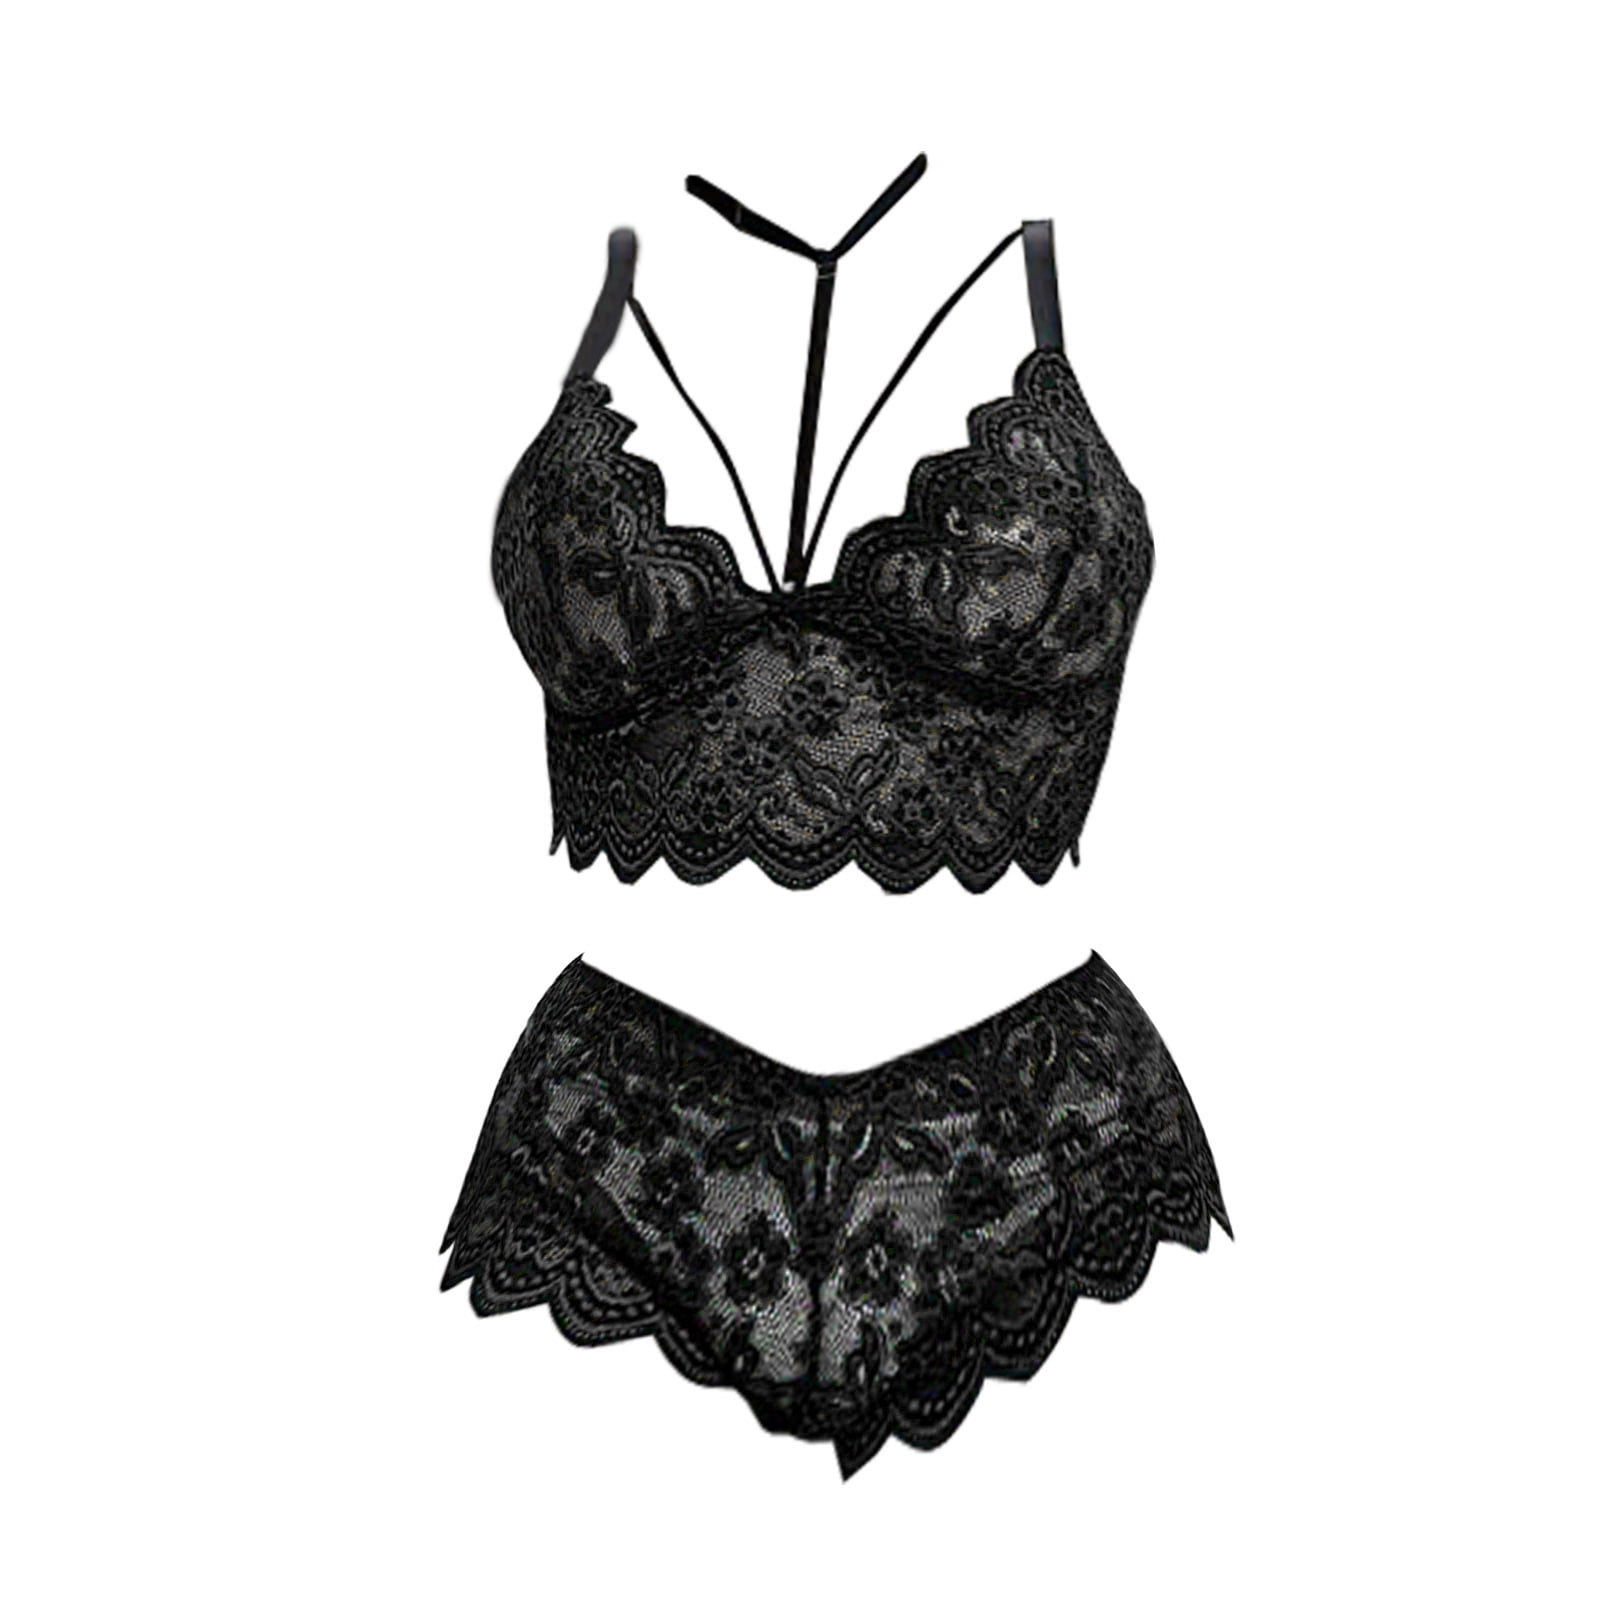 Buy online Black Net Bra And Panty Set from lingerie for Women by